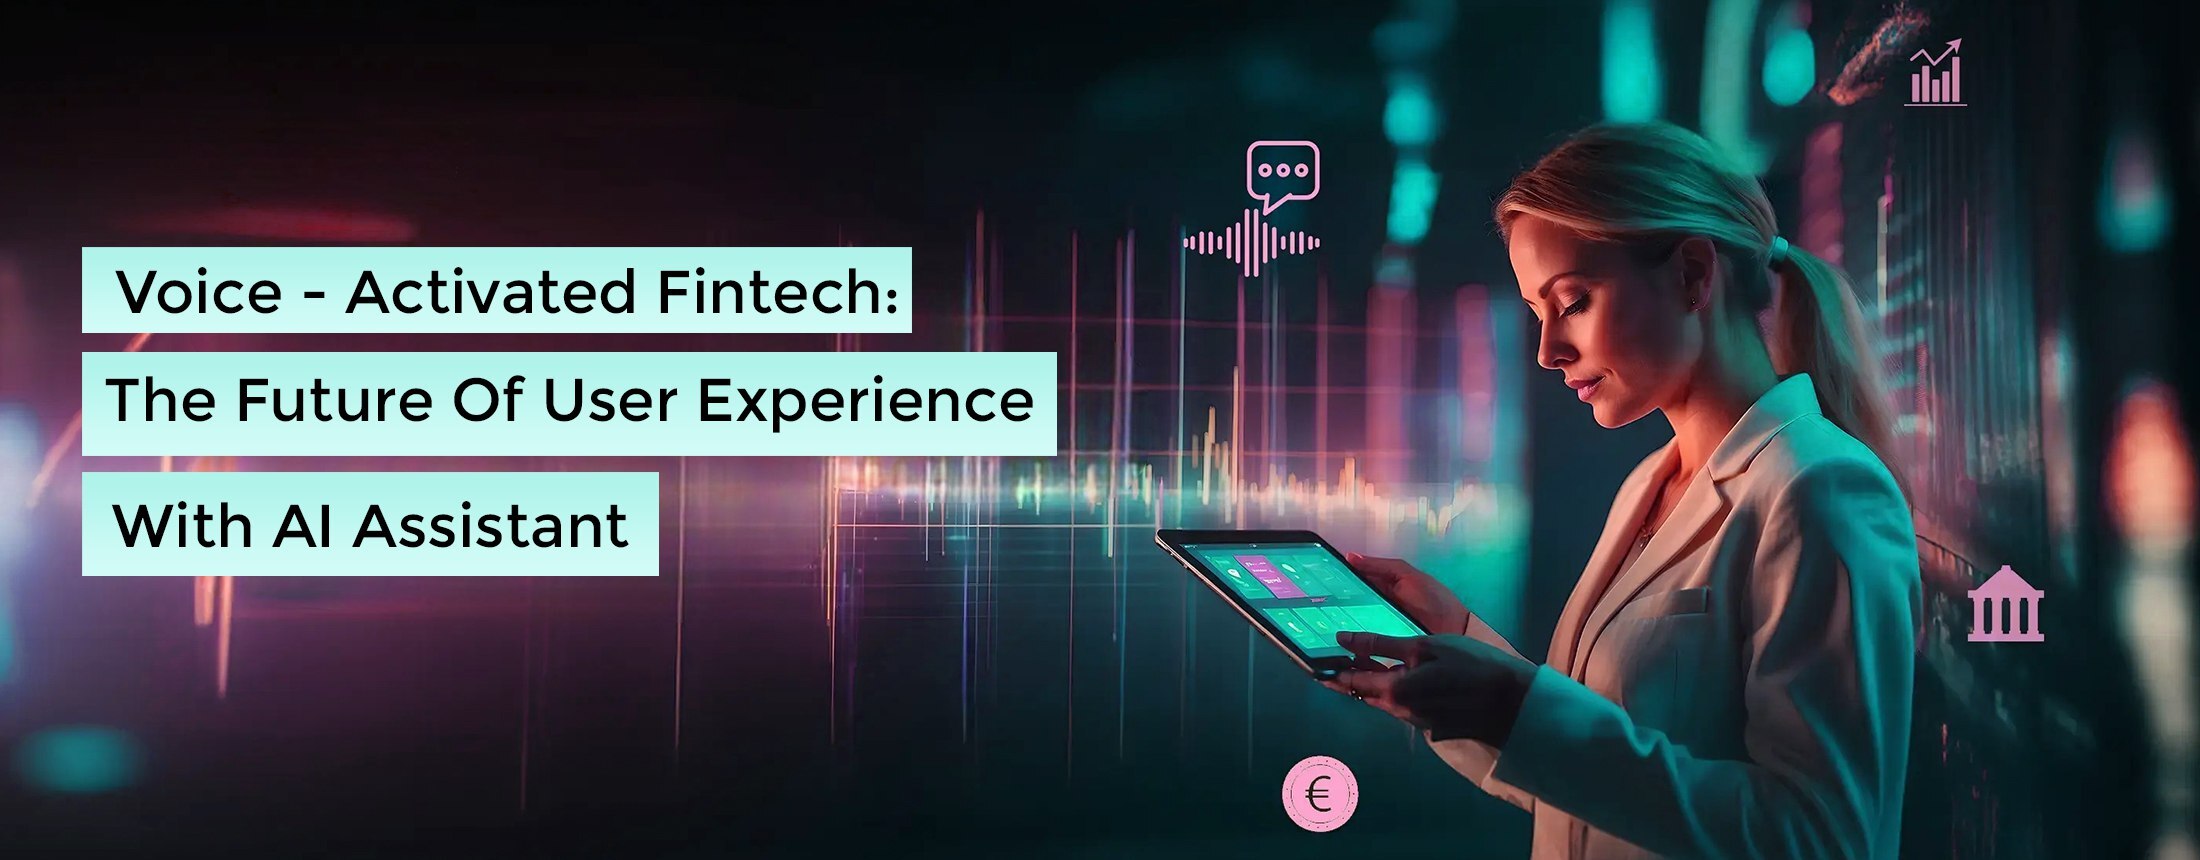 Voice-Activated Fintech: The Future of User Experience with AI Assistants